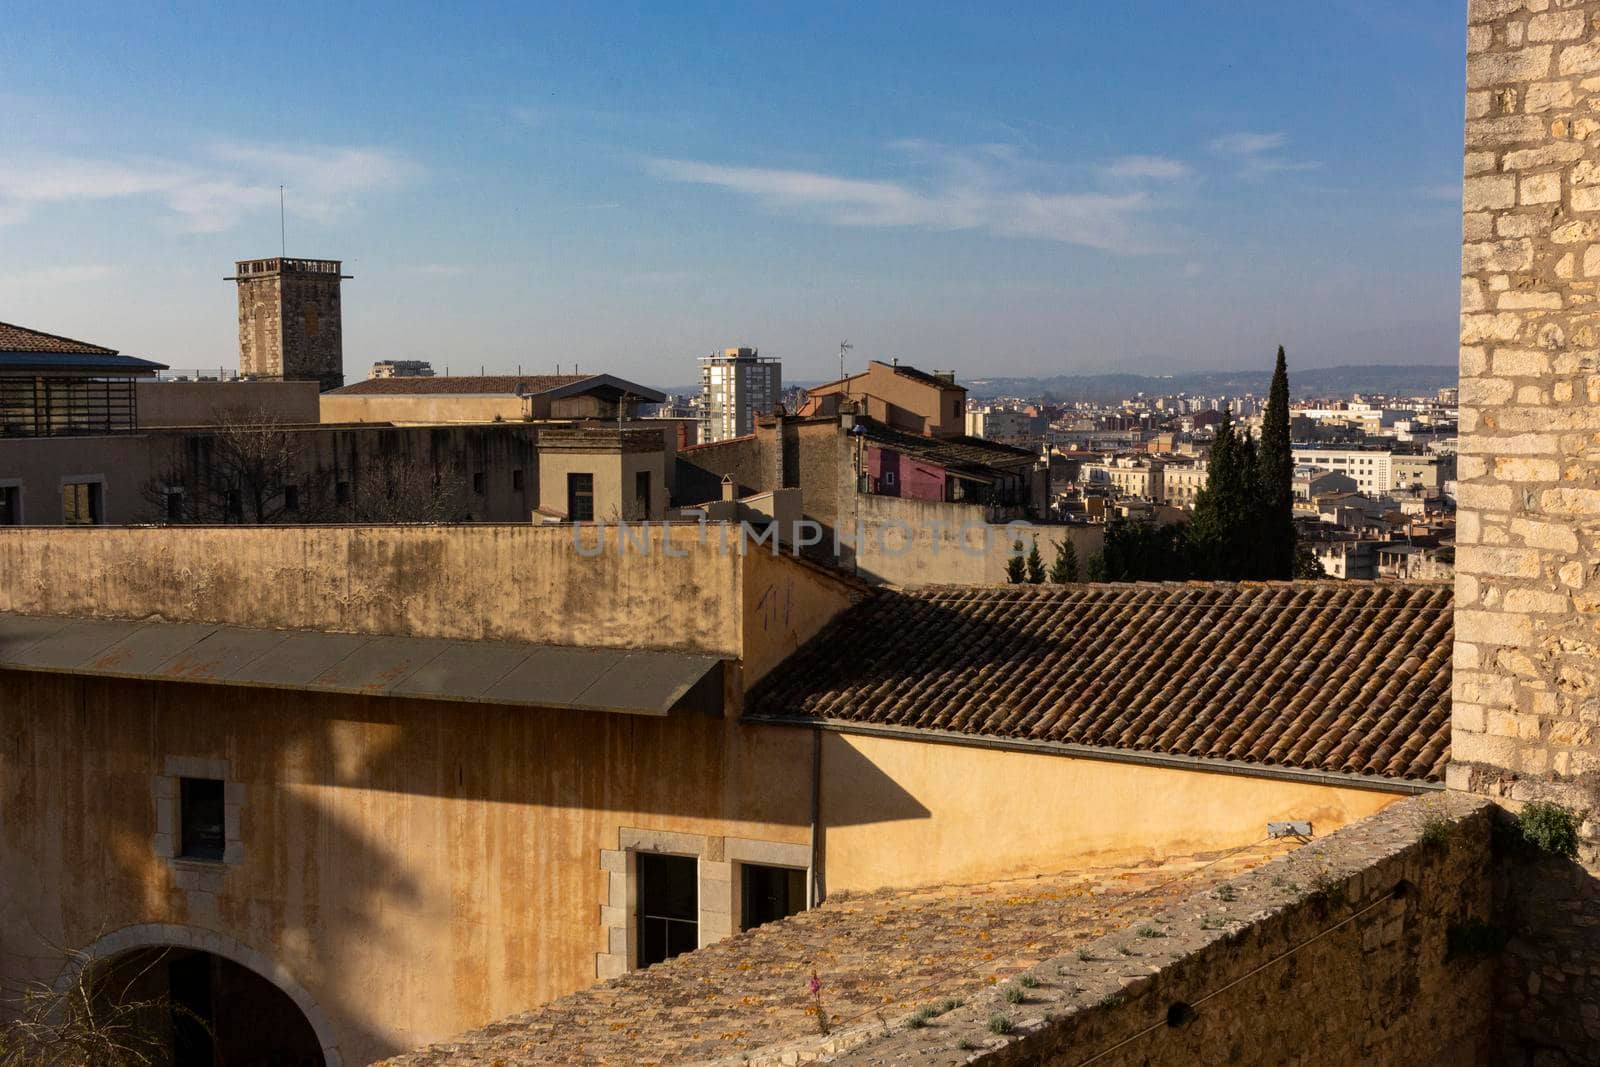 Landscape of the City of Girona in Catalonia by loopneo